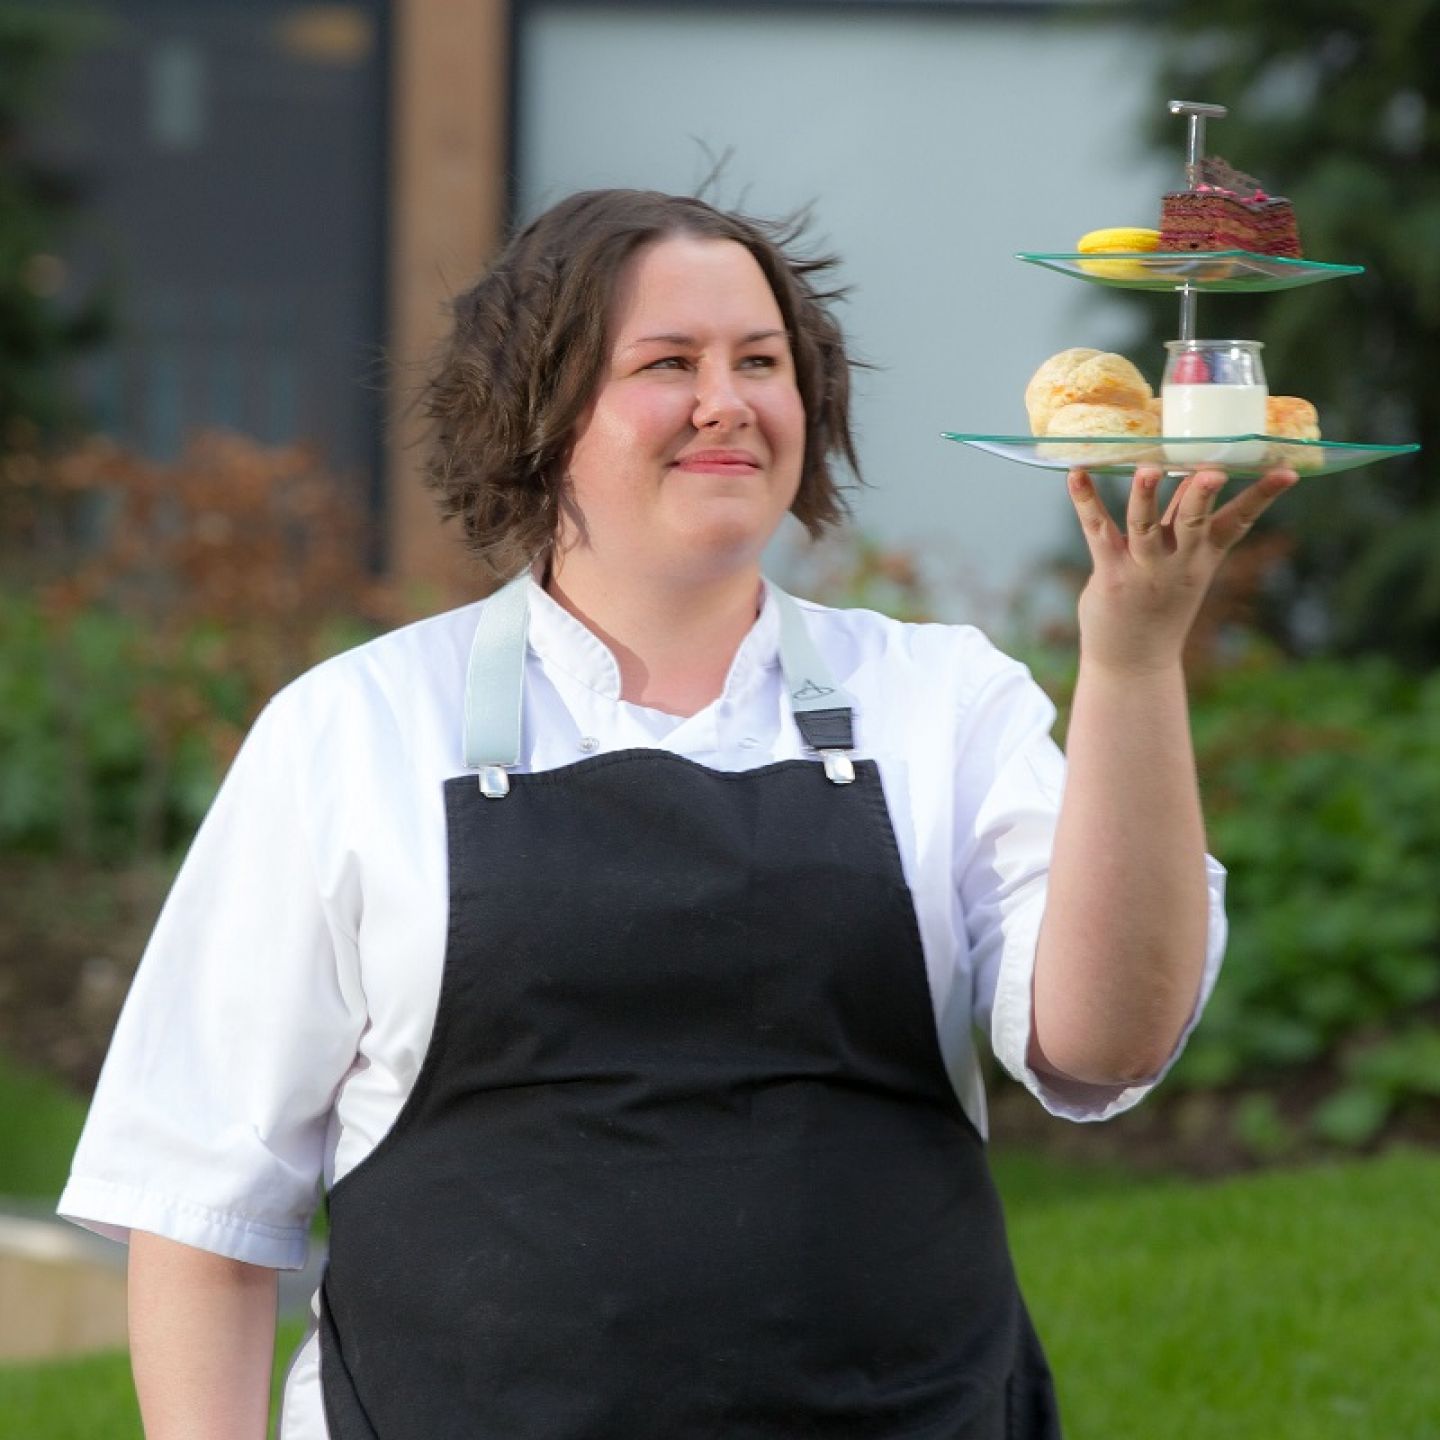 A profile picture of Helen Vass, a GCU alumna and a pastry chef, in chef's uniform holding a selection of cakes in a cake stand.